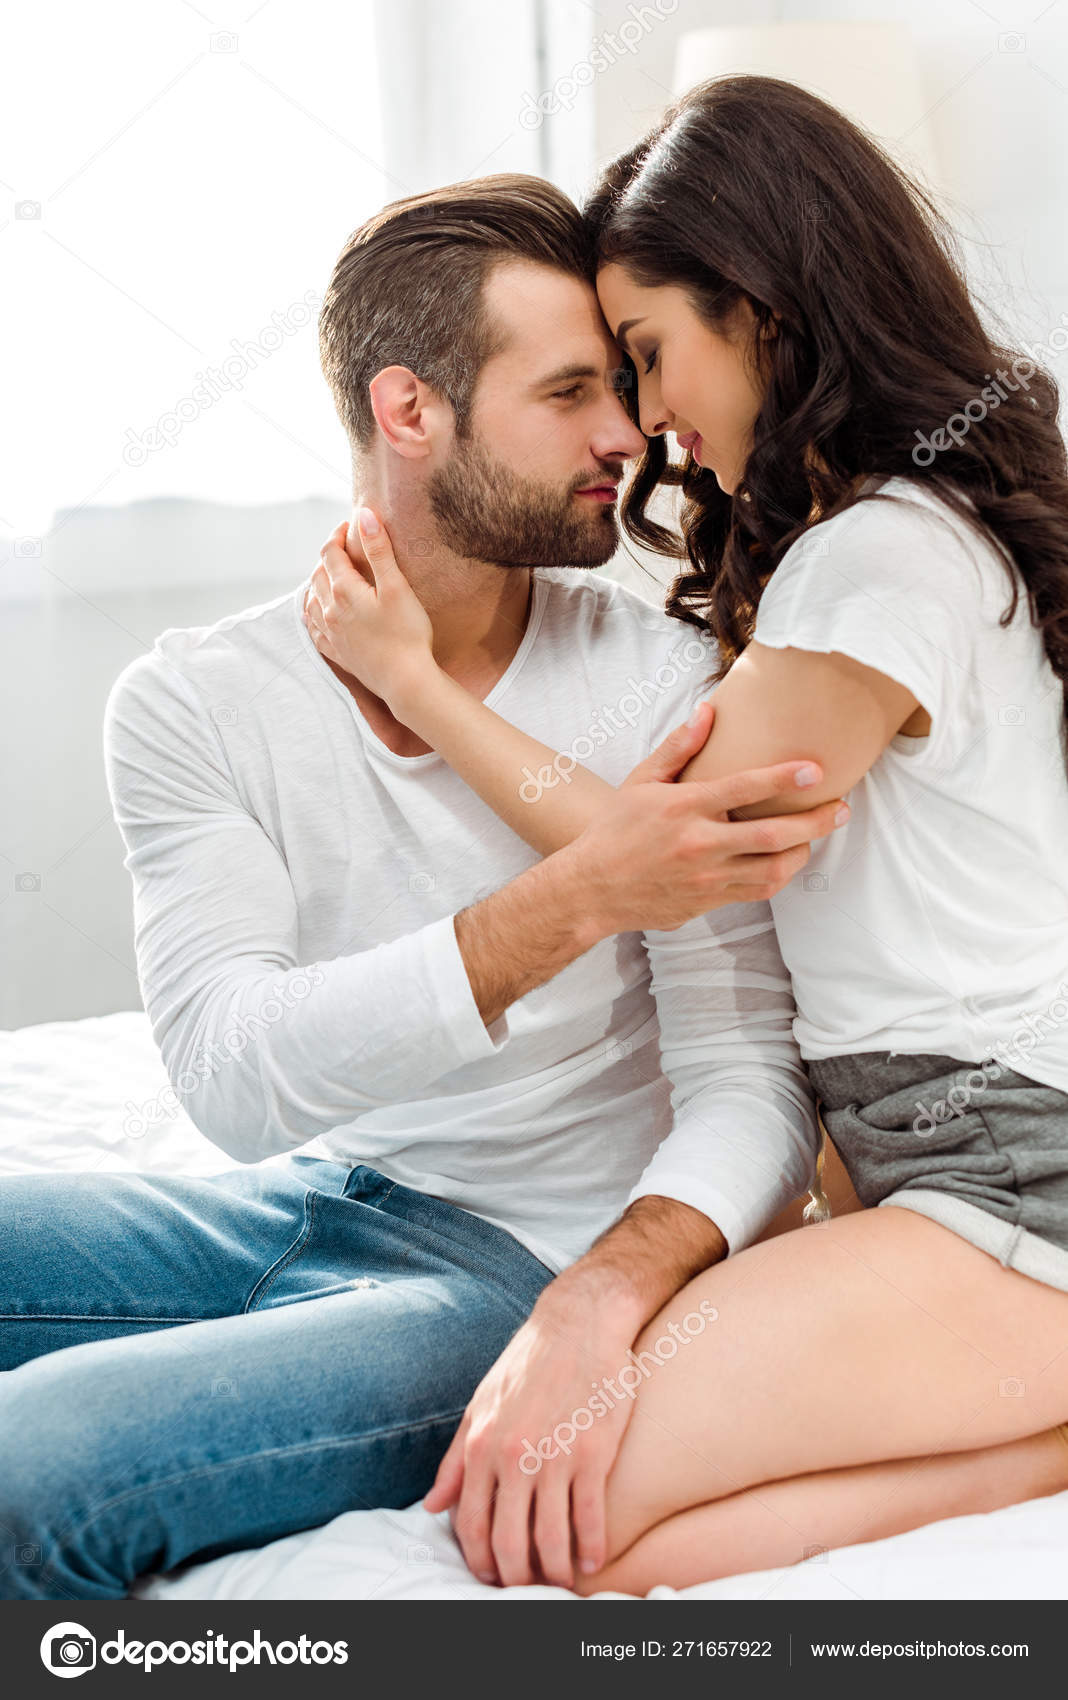 1 028 906 Romantic Couple Stock Photos Images Download Romantic Couple Pictures On Depositphotos